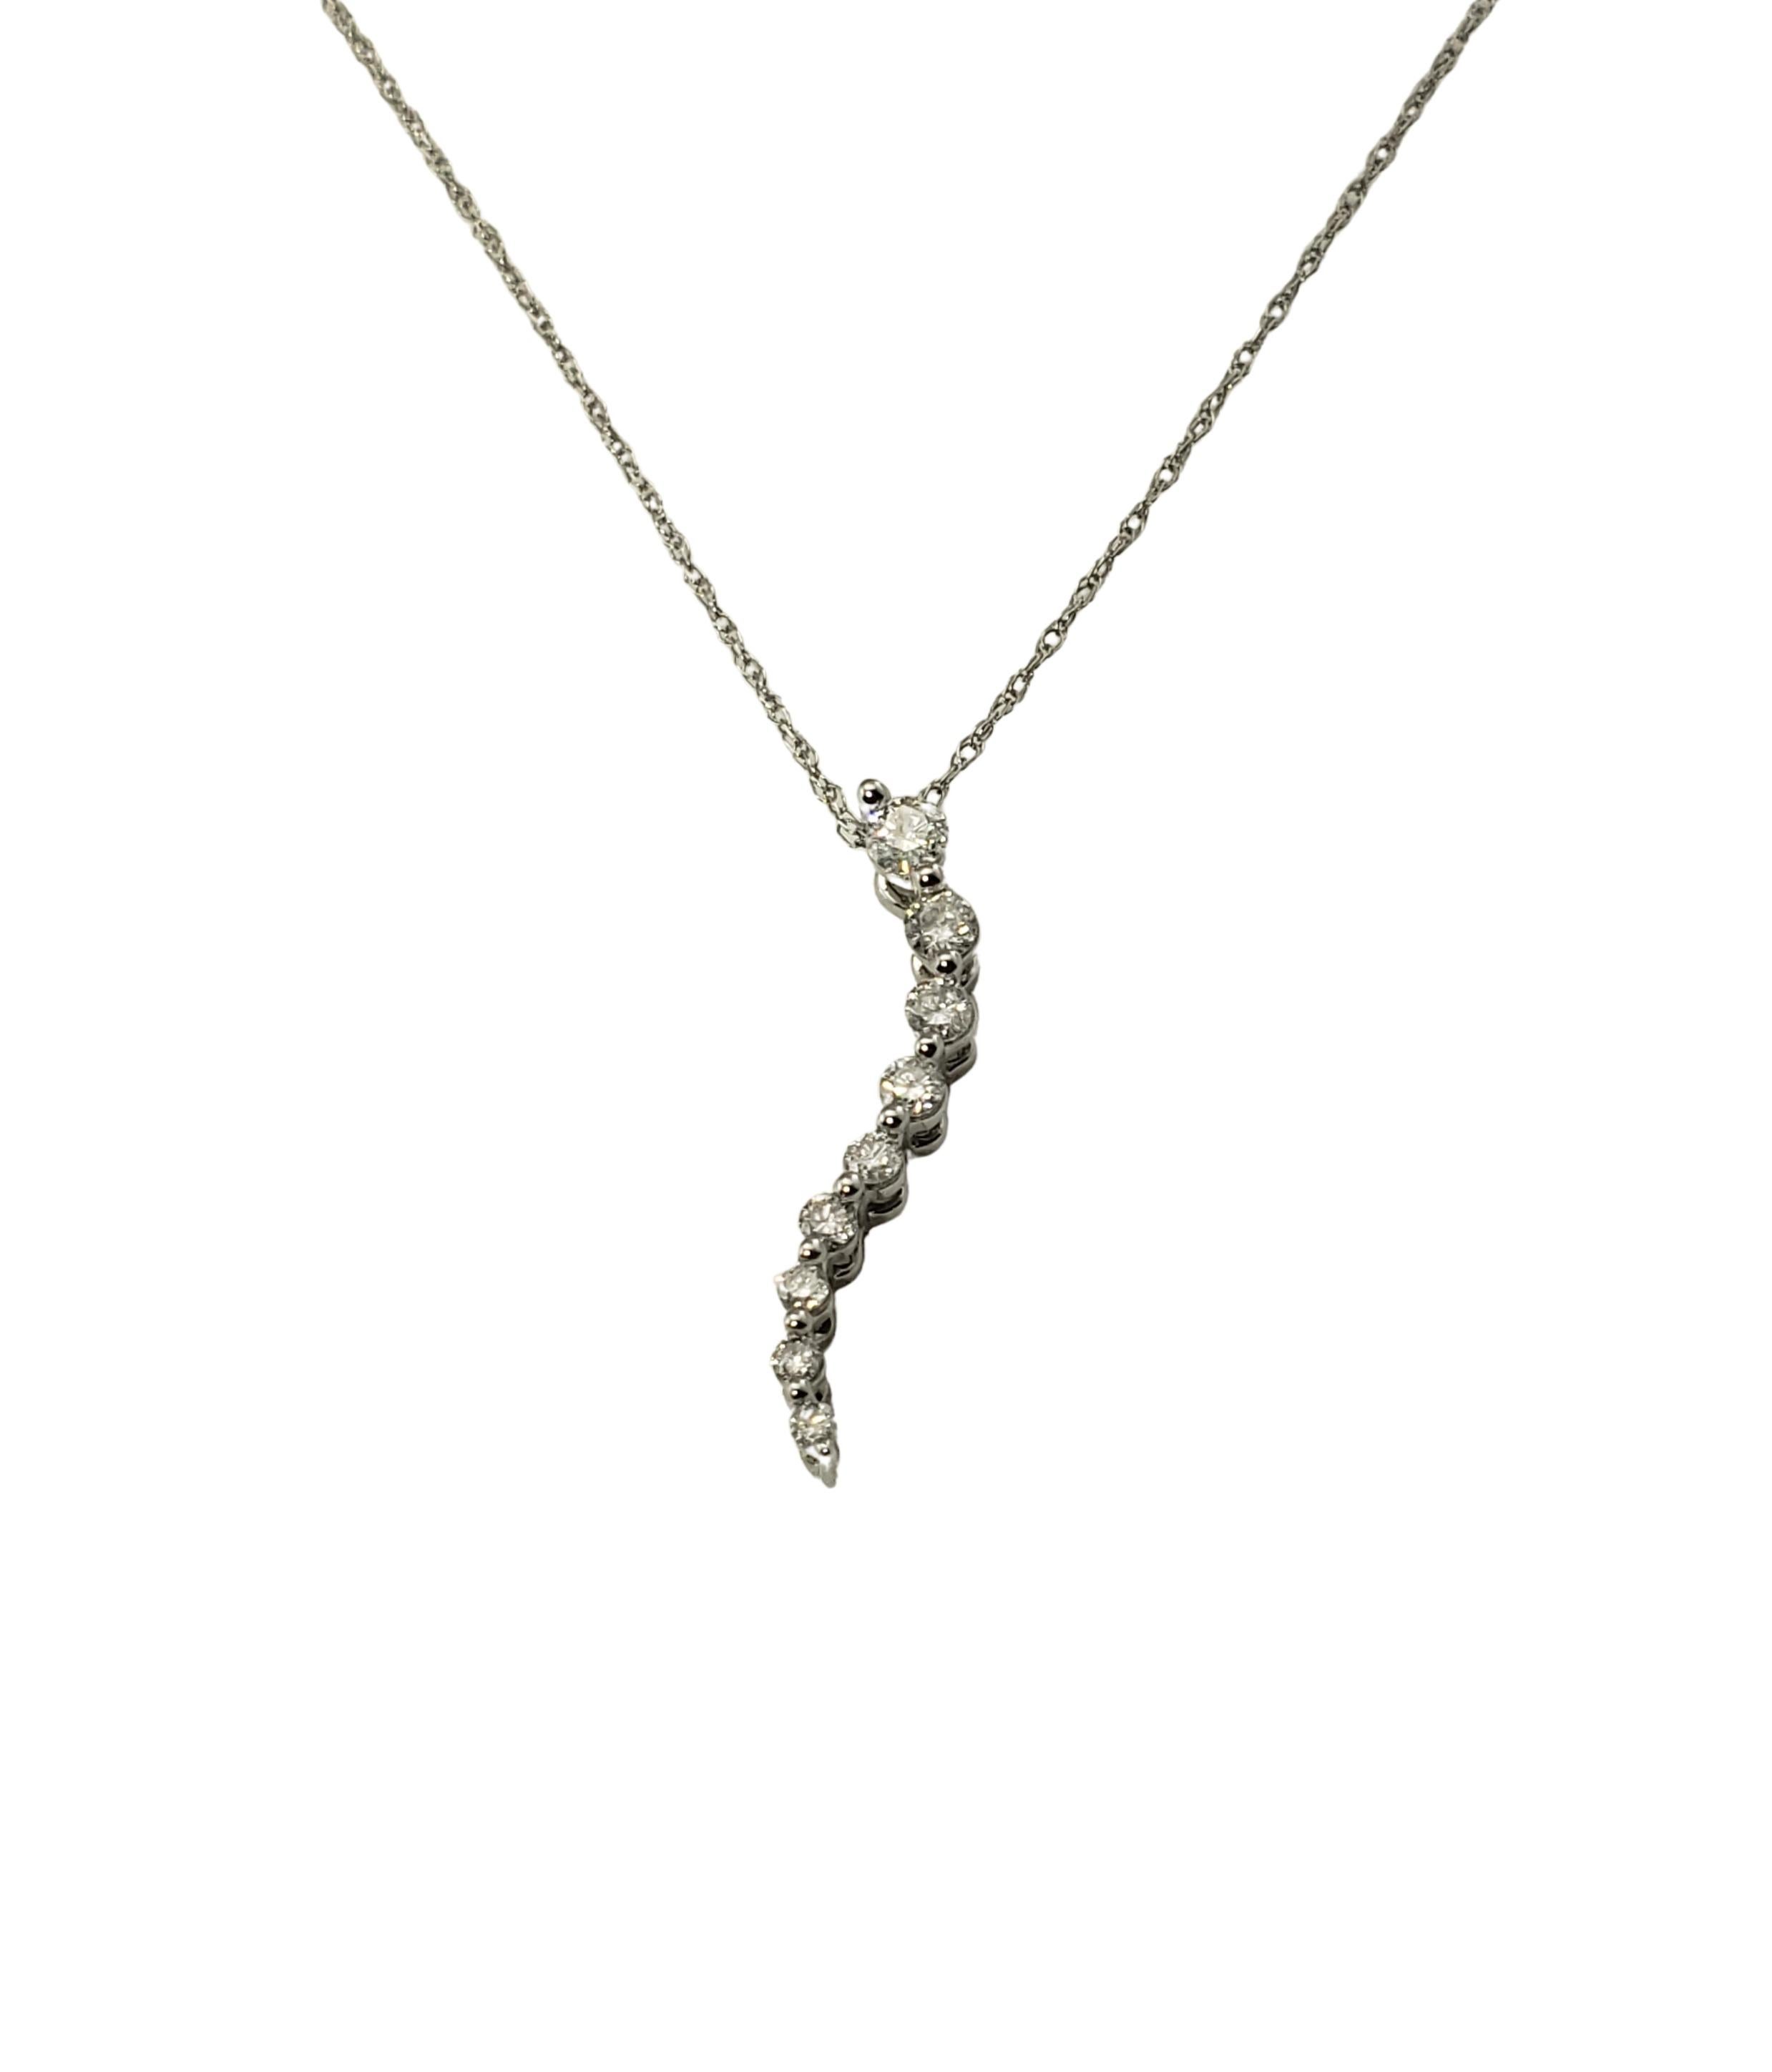 10 Karat White Gold and Diamond Pendant Necklace For Sale 2